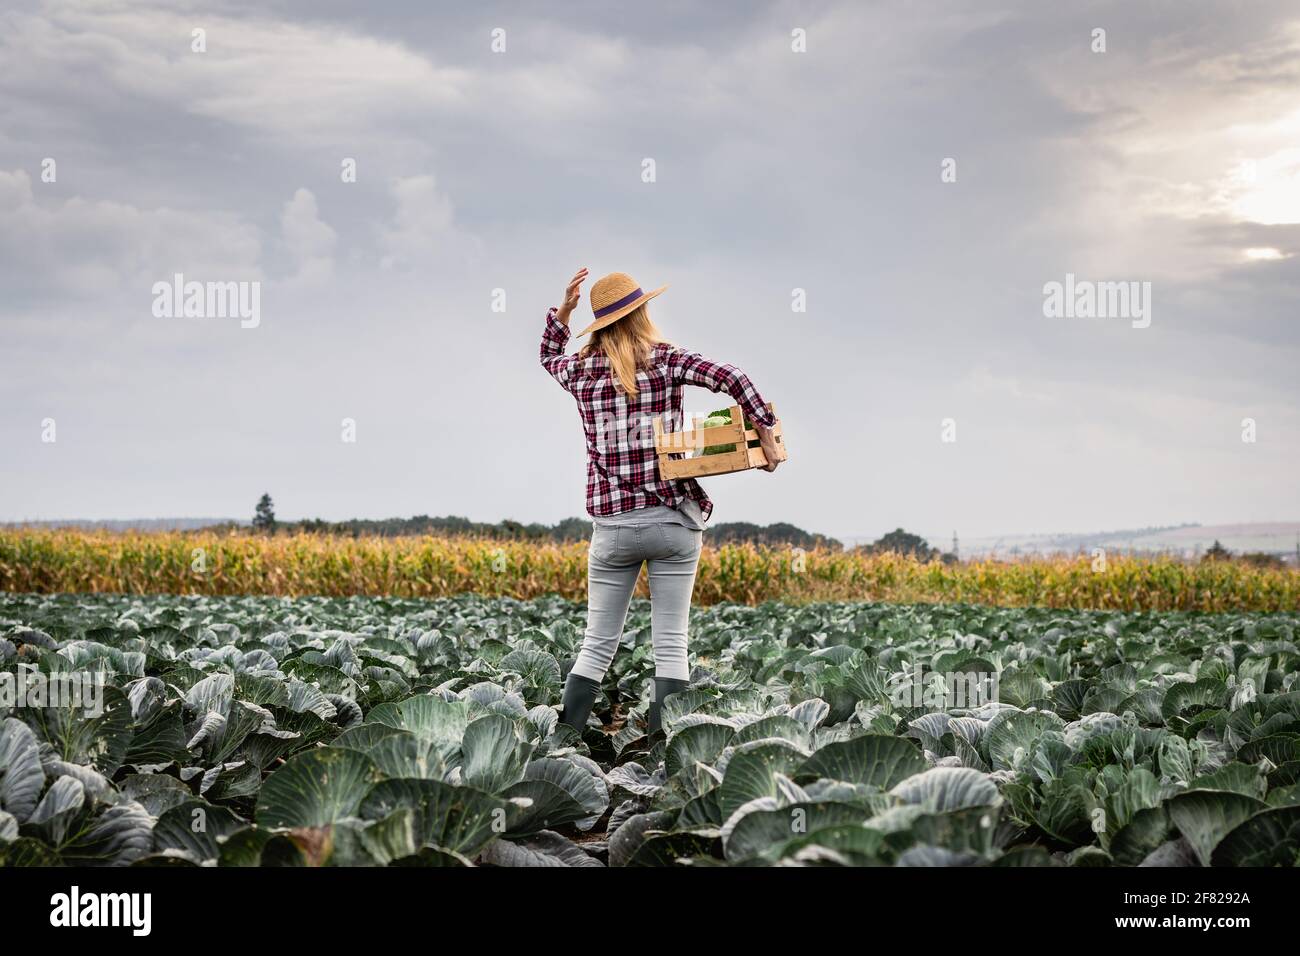 Farmer standing in cabbage field. Agricultural activity and gardening during harvest season. Woman with straw hat holding wooden crate and picking lea Stock Photo